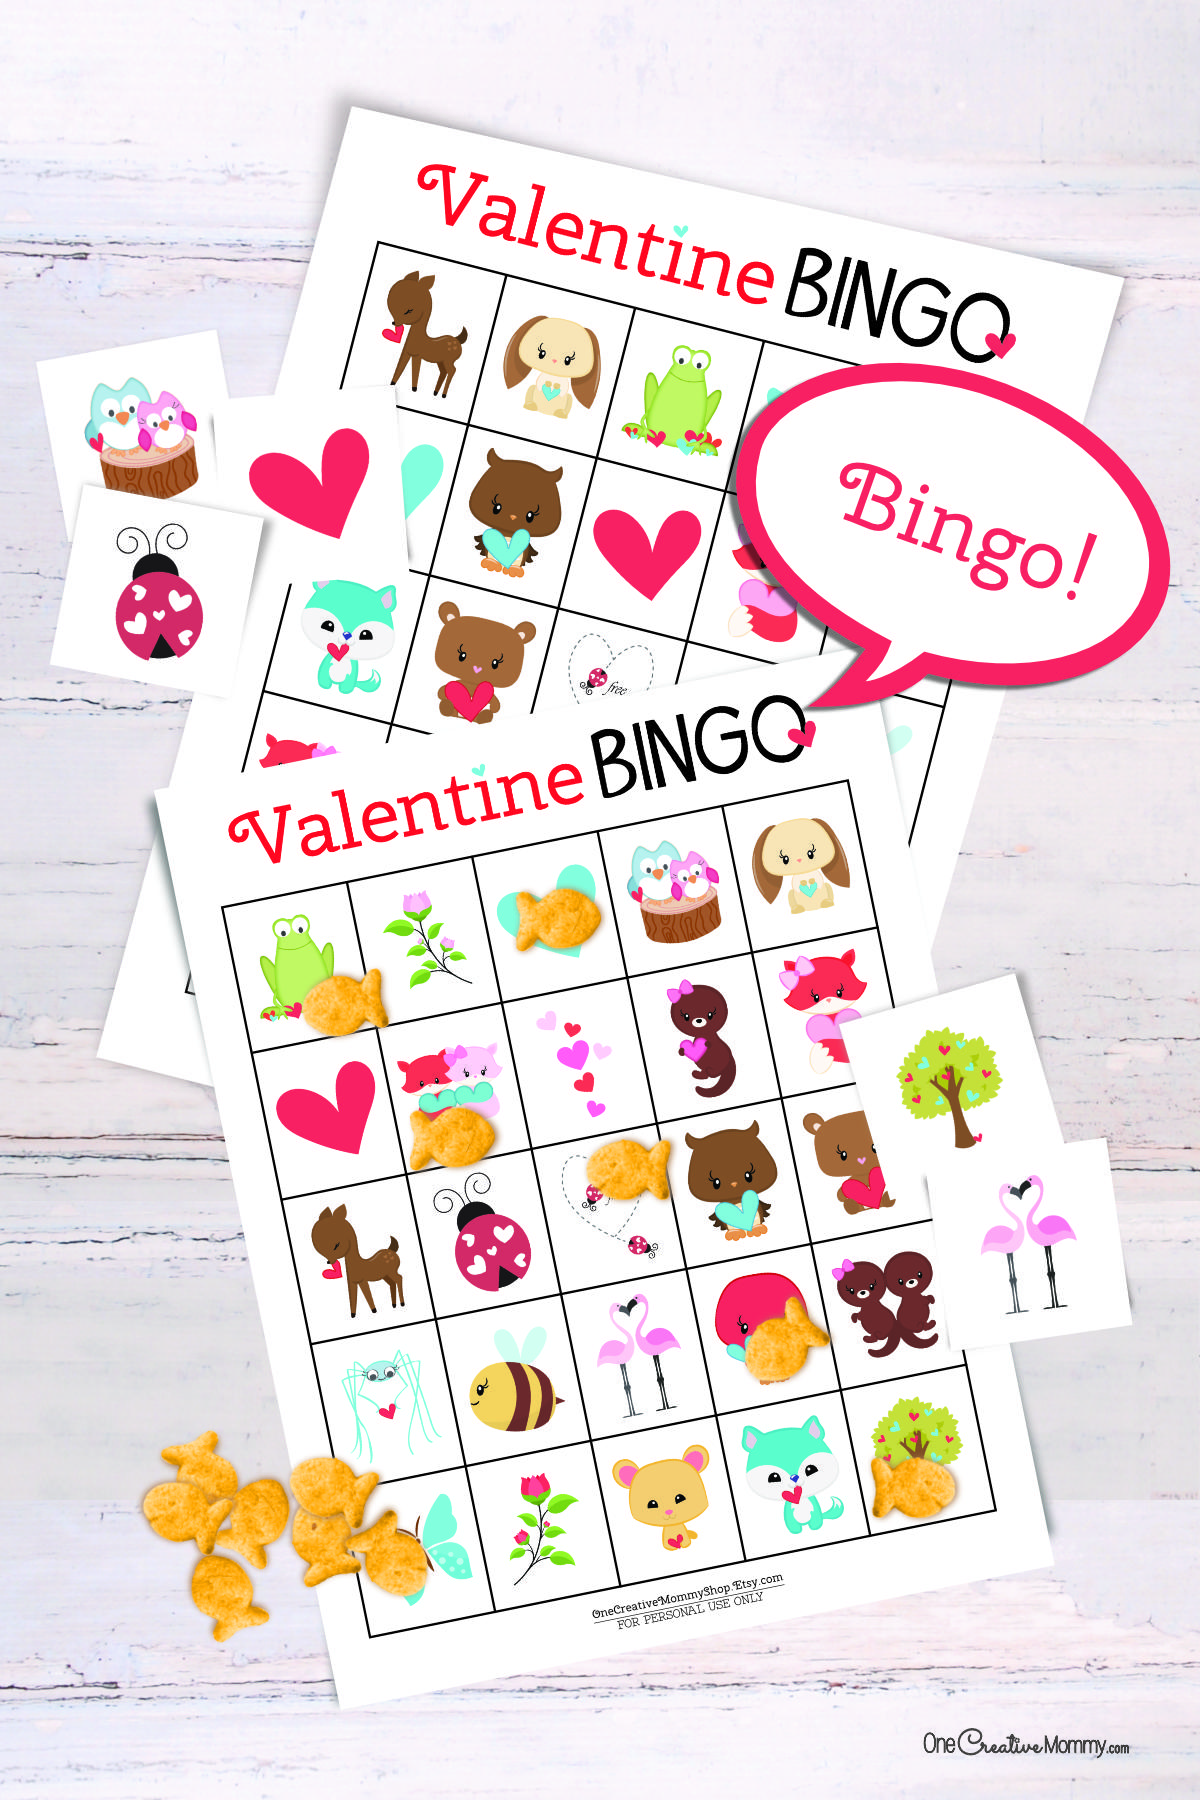 2 Valentines Day bingo cards are laid on top of each other on a white table. There is a small pile of goldfish crackers. Six calling cards are scattered across the game, and several spots are marked with crackers. A word bubble says Bingo!